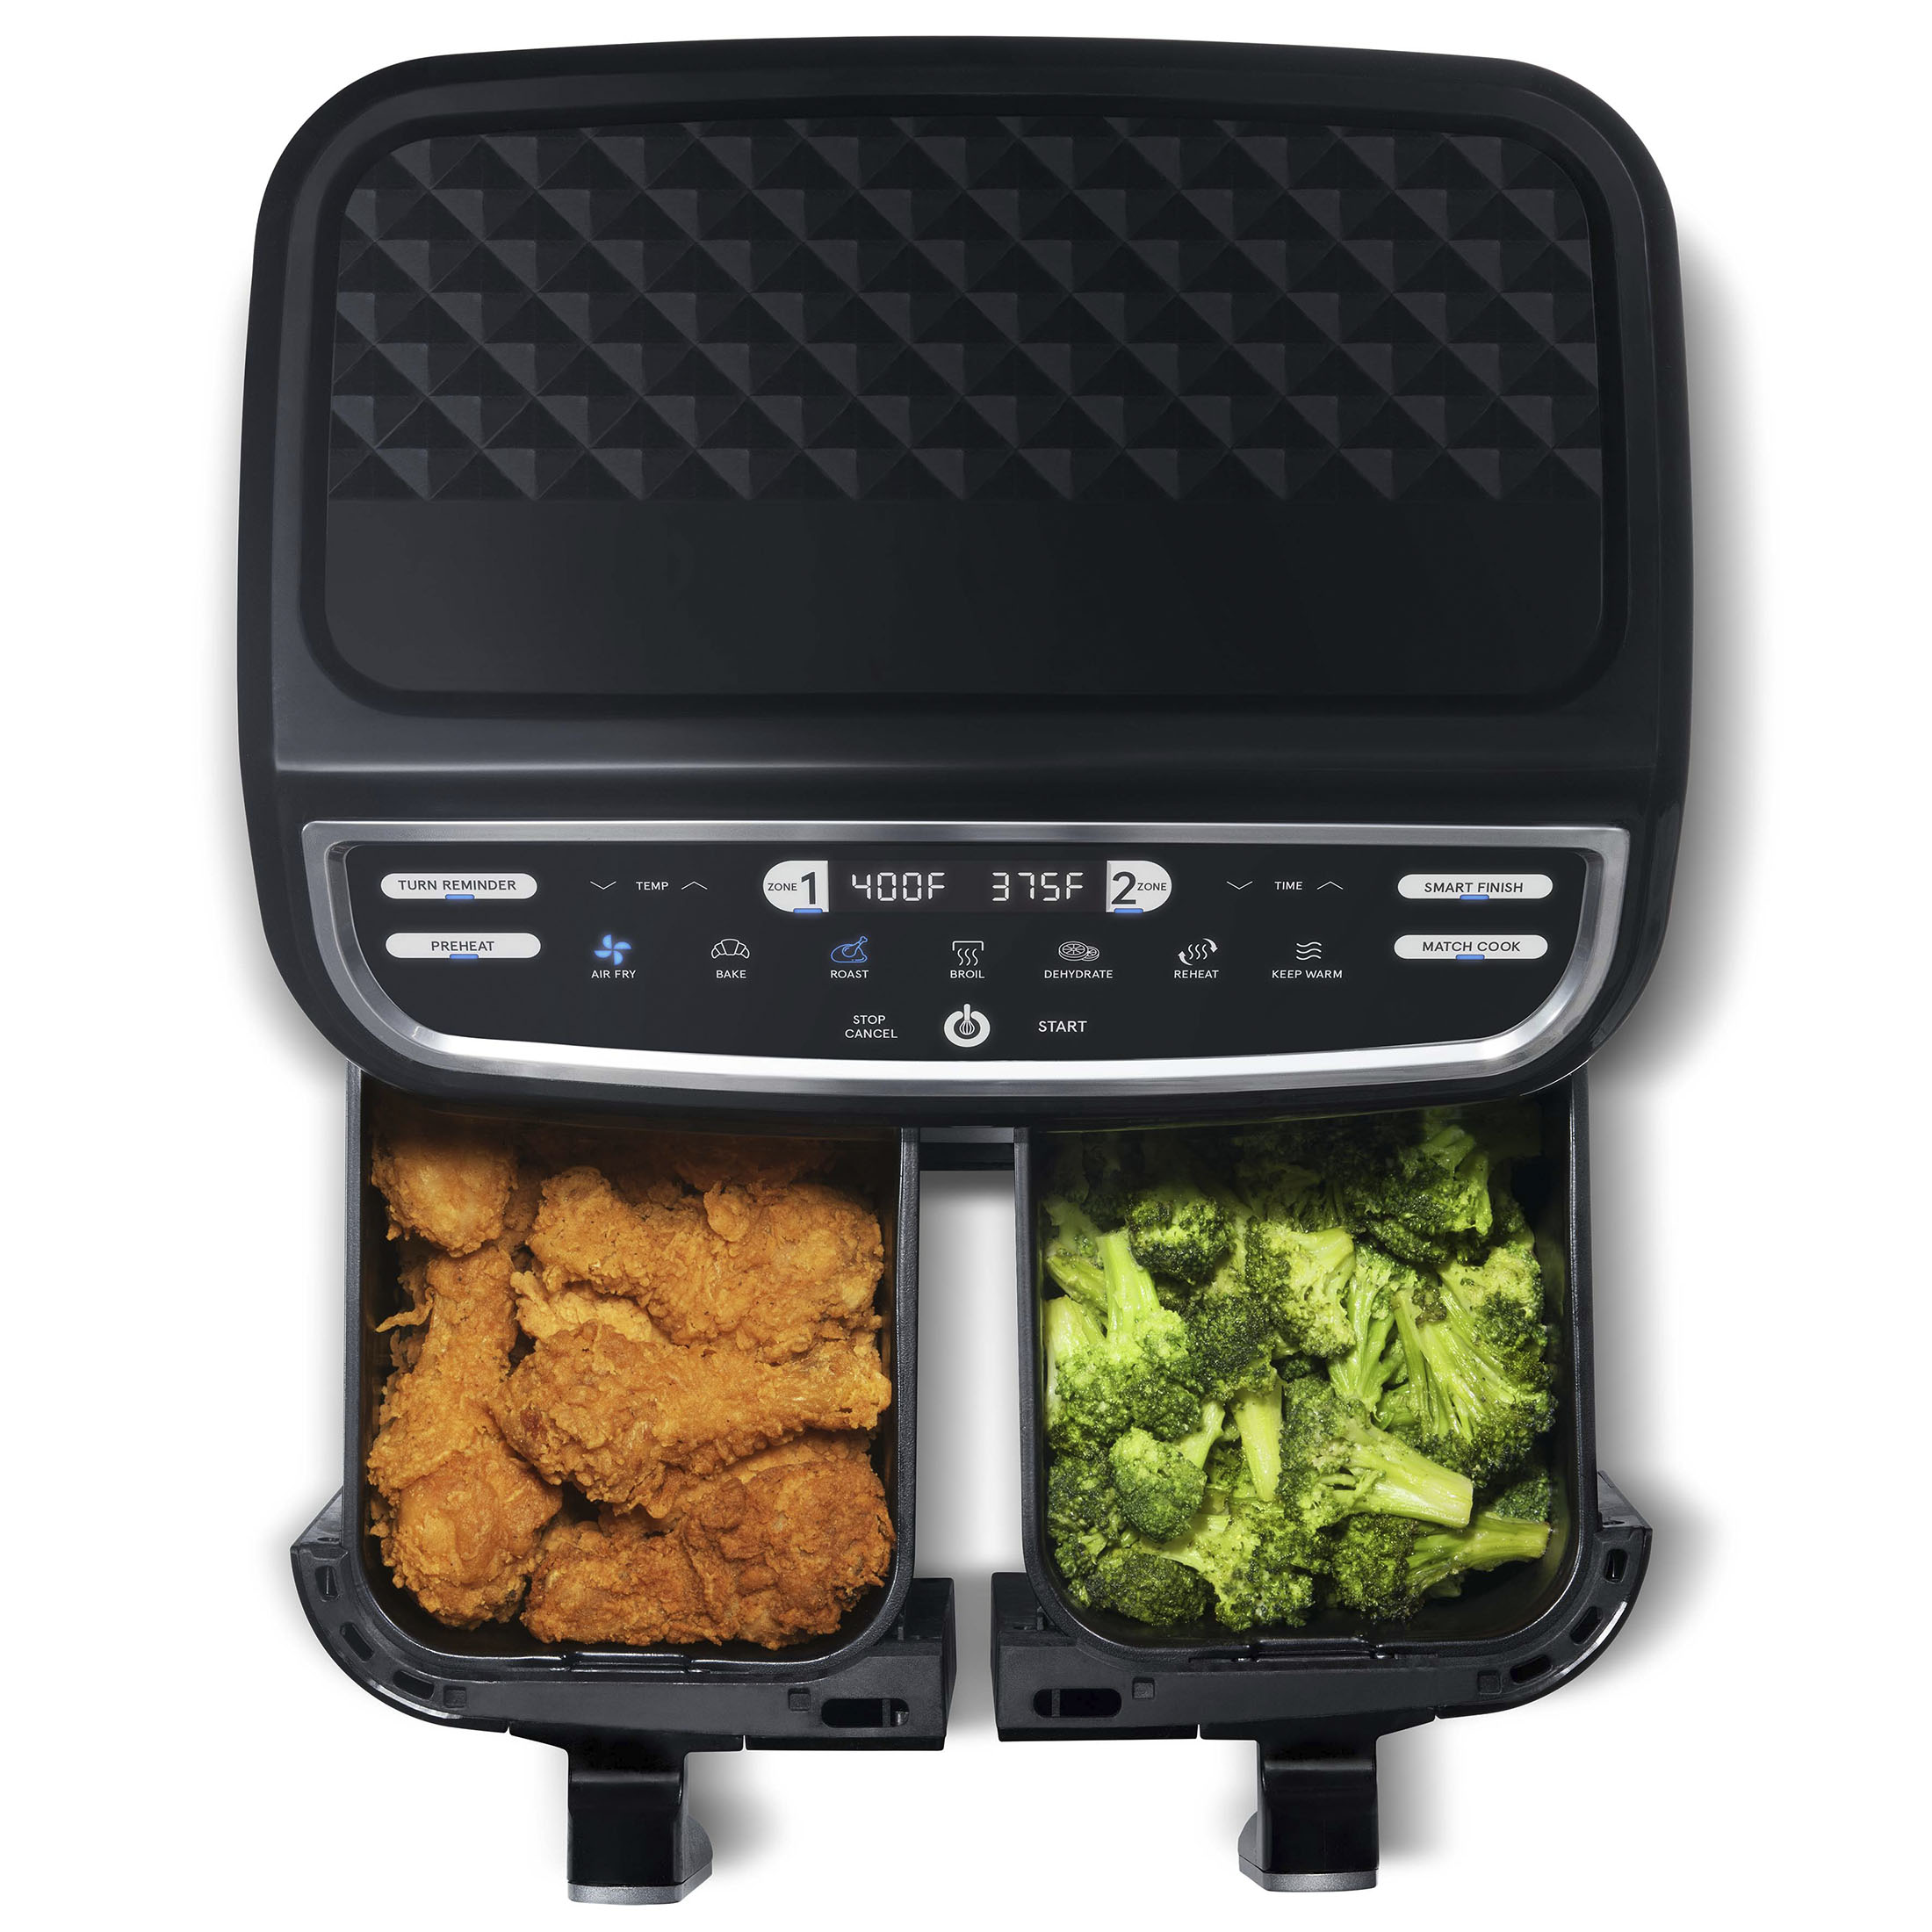 Gourmia 9 Qt 7-in-1 Dual Basket Digital Air Fryer with Smart Finish, BLK, 12.598 H, New - image 11 of 14